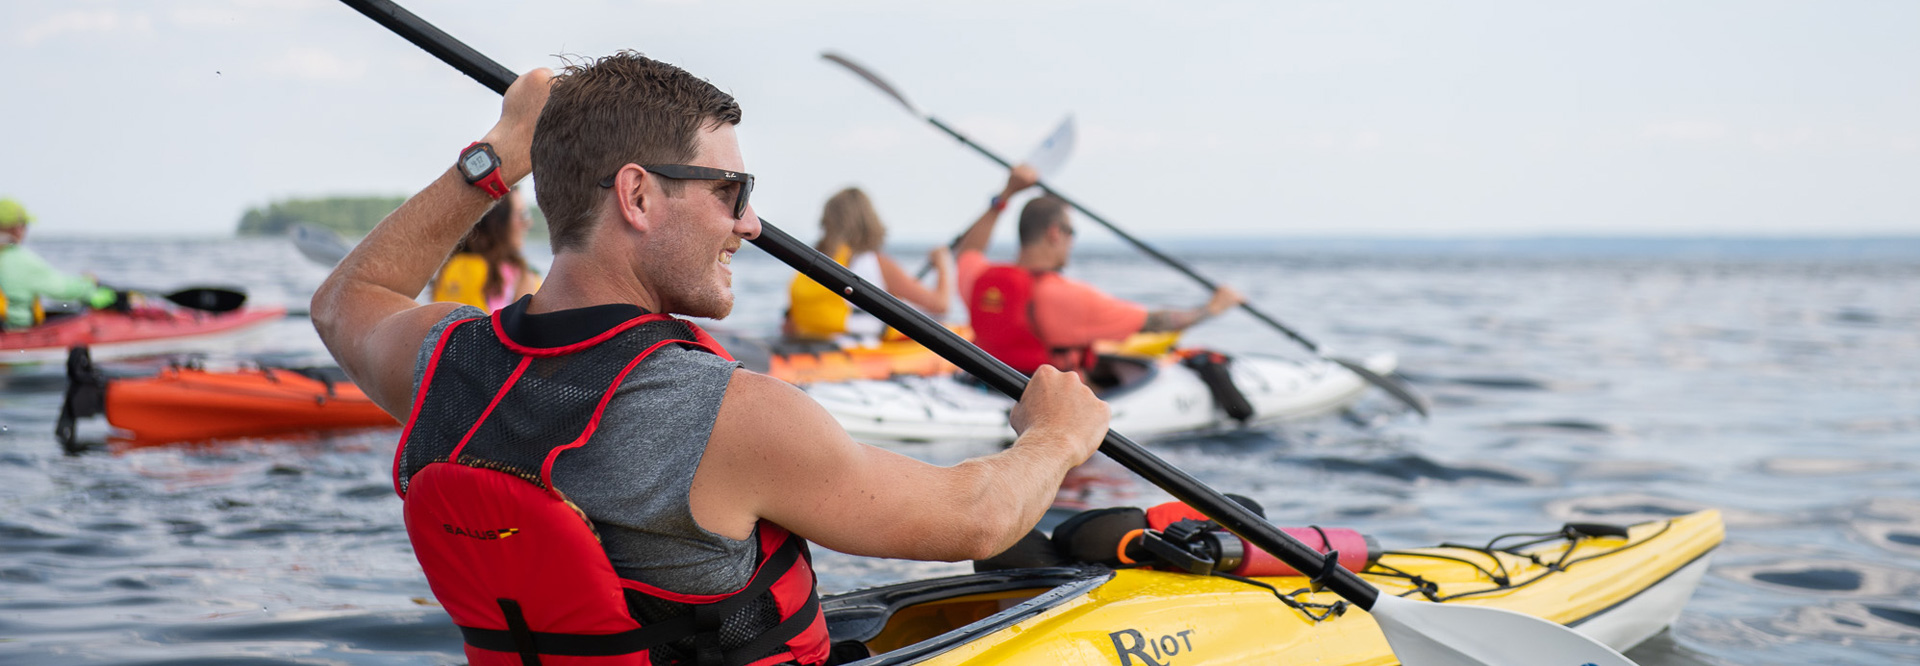 Enjoy kayaking on any of our outdoor adventure packages.